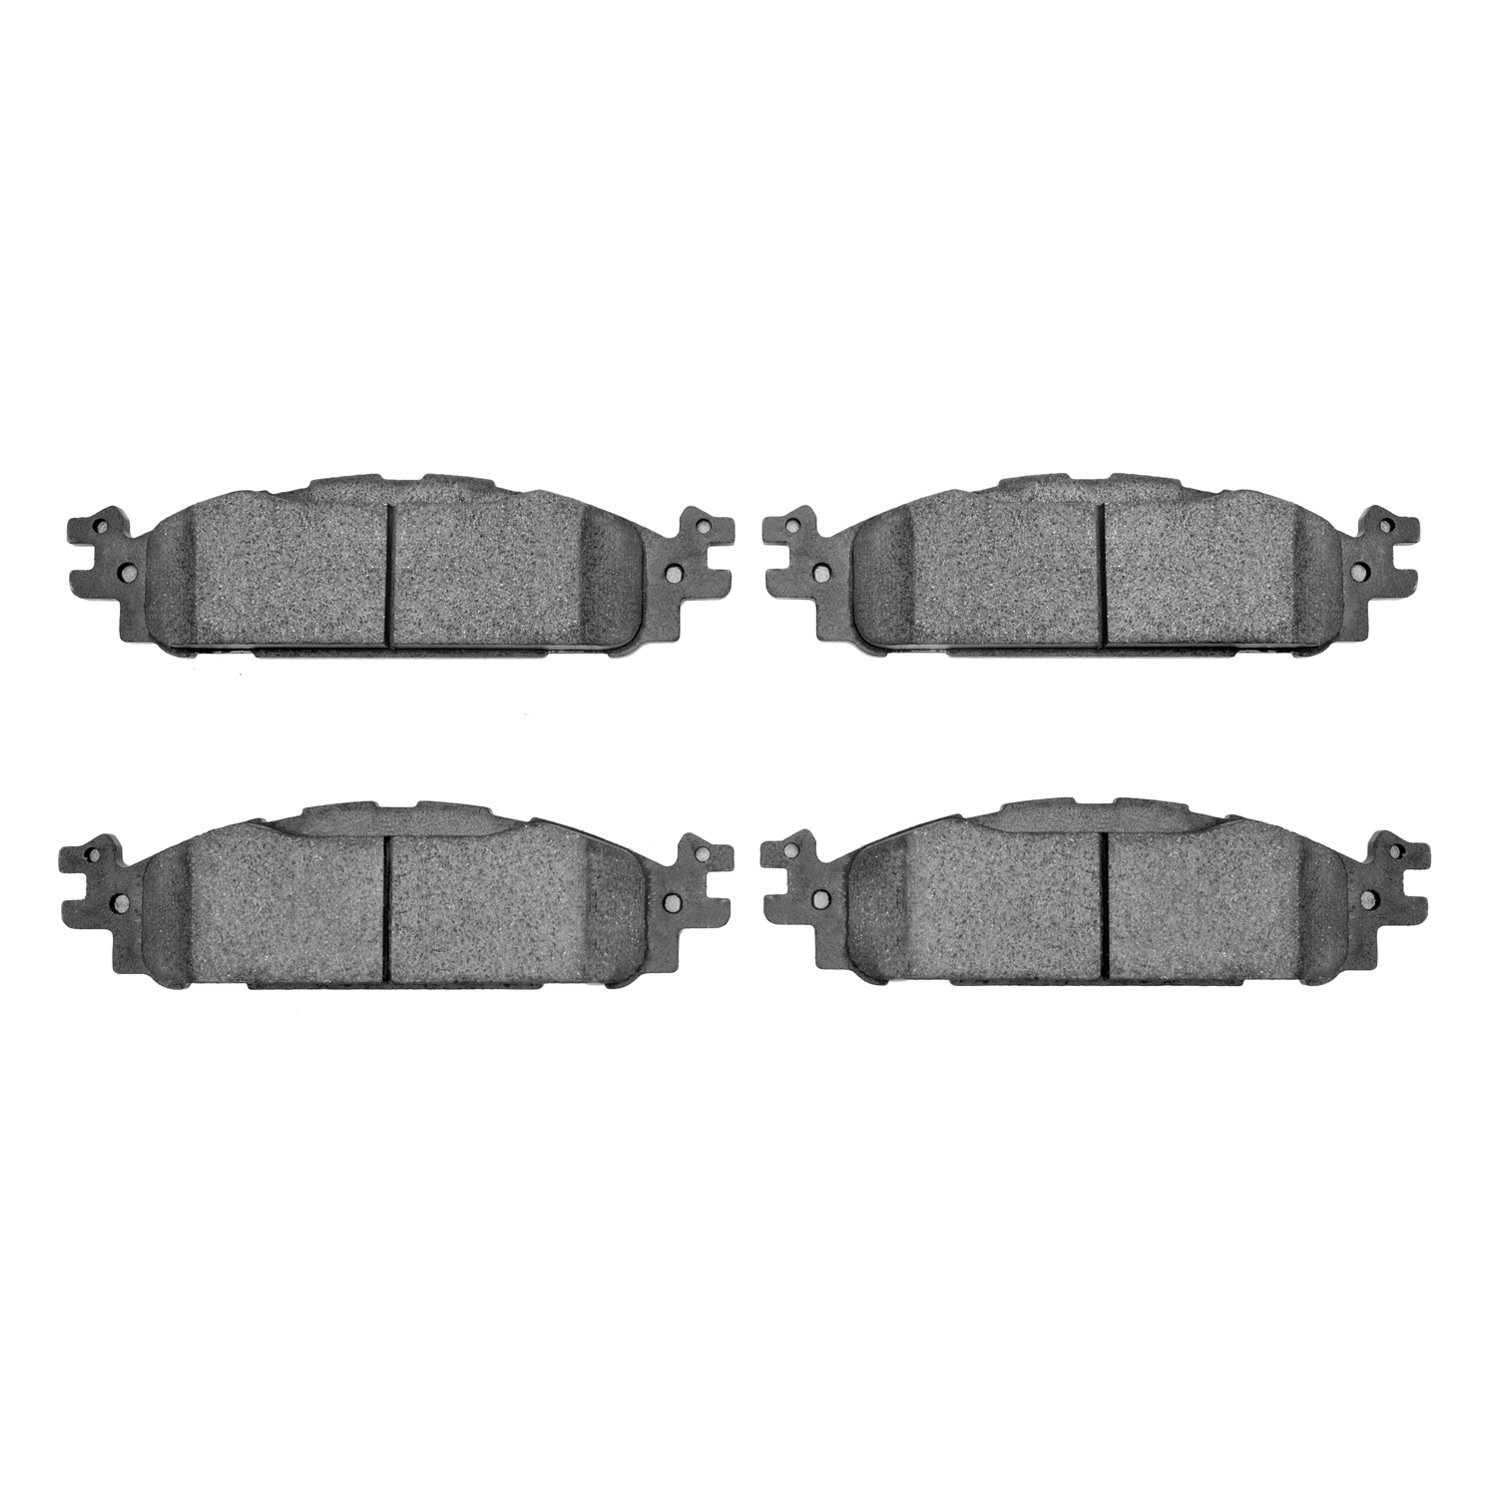 1000-1508-00 Track/Street Low-Metallic Brake Pads Kit, 2009-2019 Ford/Lincoln/Mercury/Mazda, Position: Front